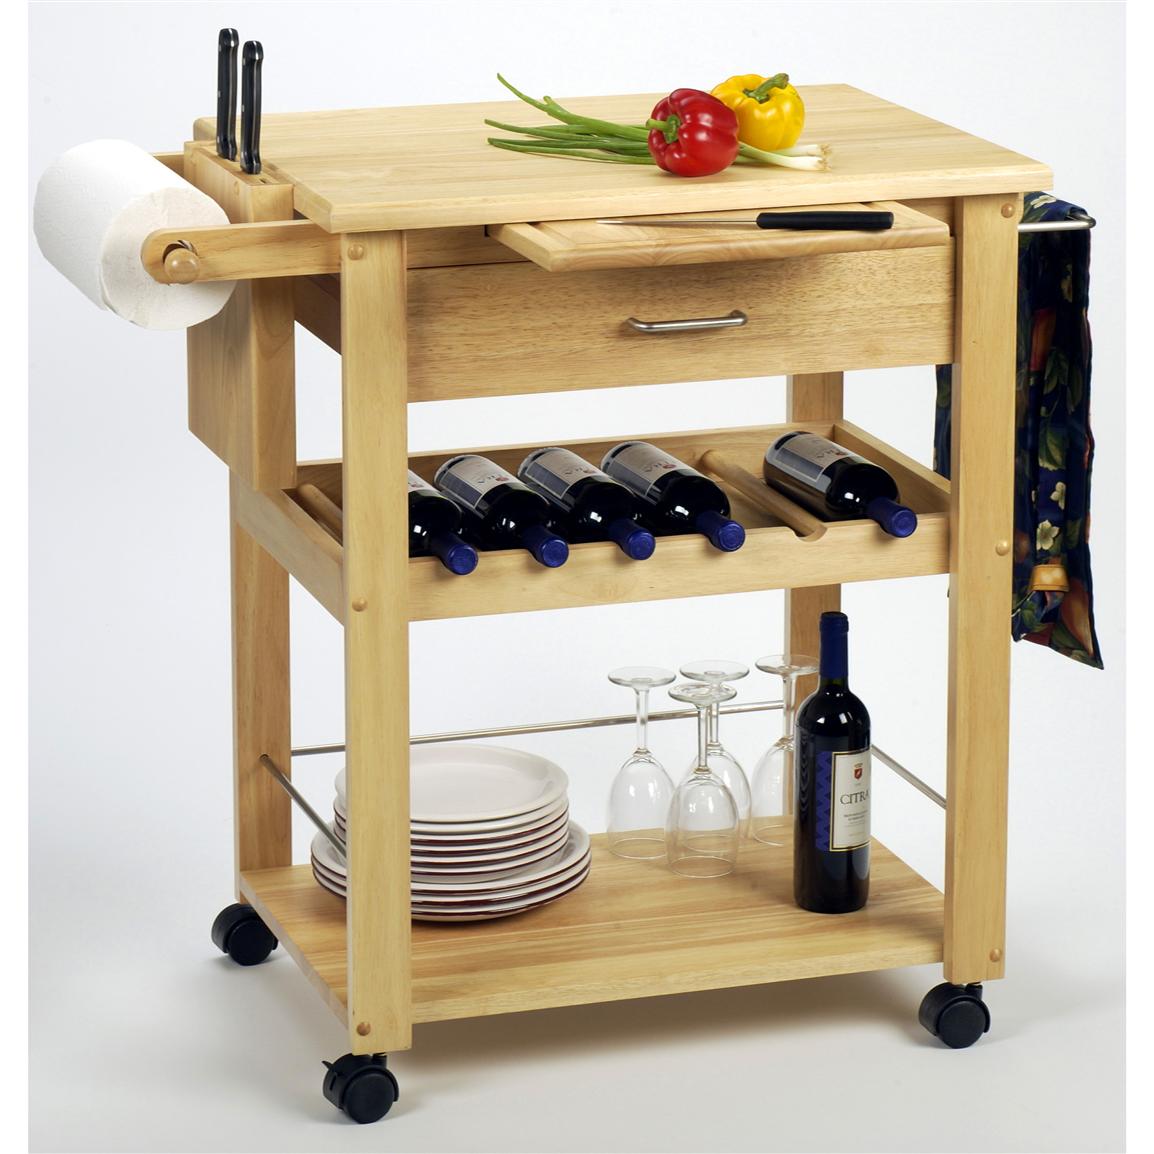 Featured image of post Kitchen Cart With Wine Rack : Kitchen island / wine rack: